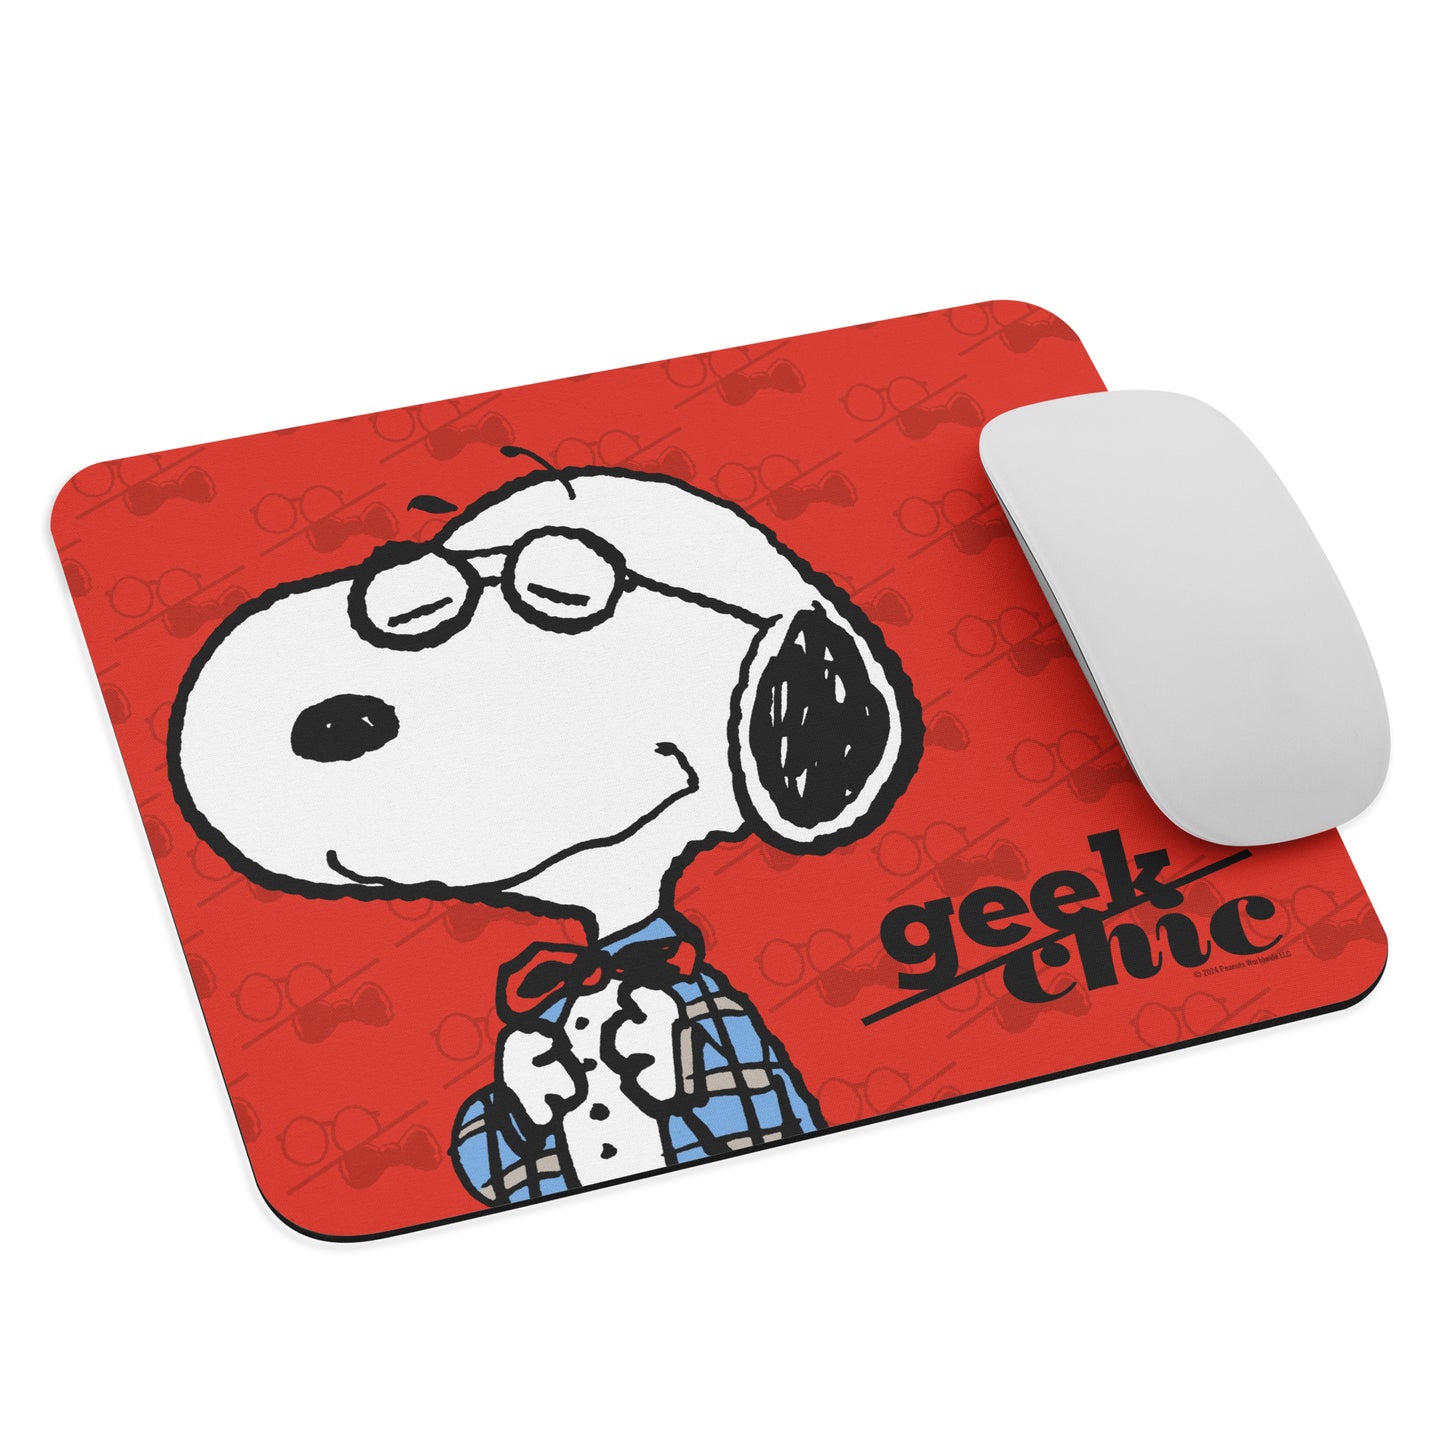 Snoopy Geek Chic Mouse Pad